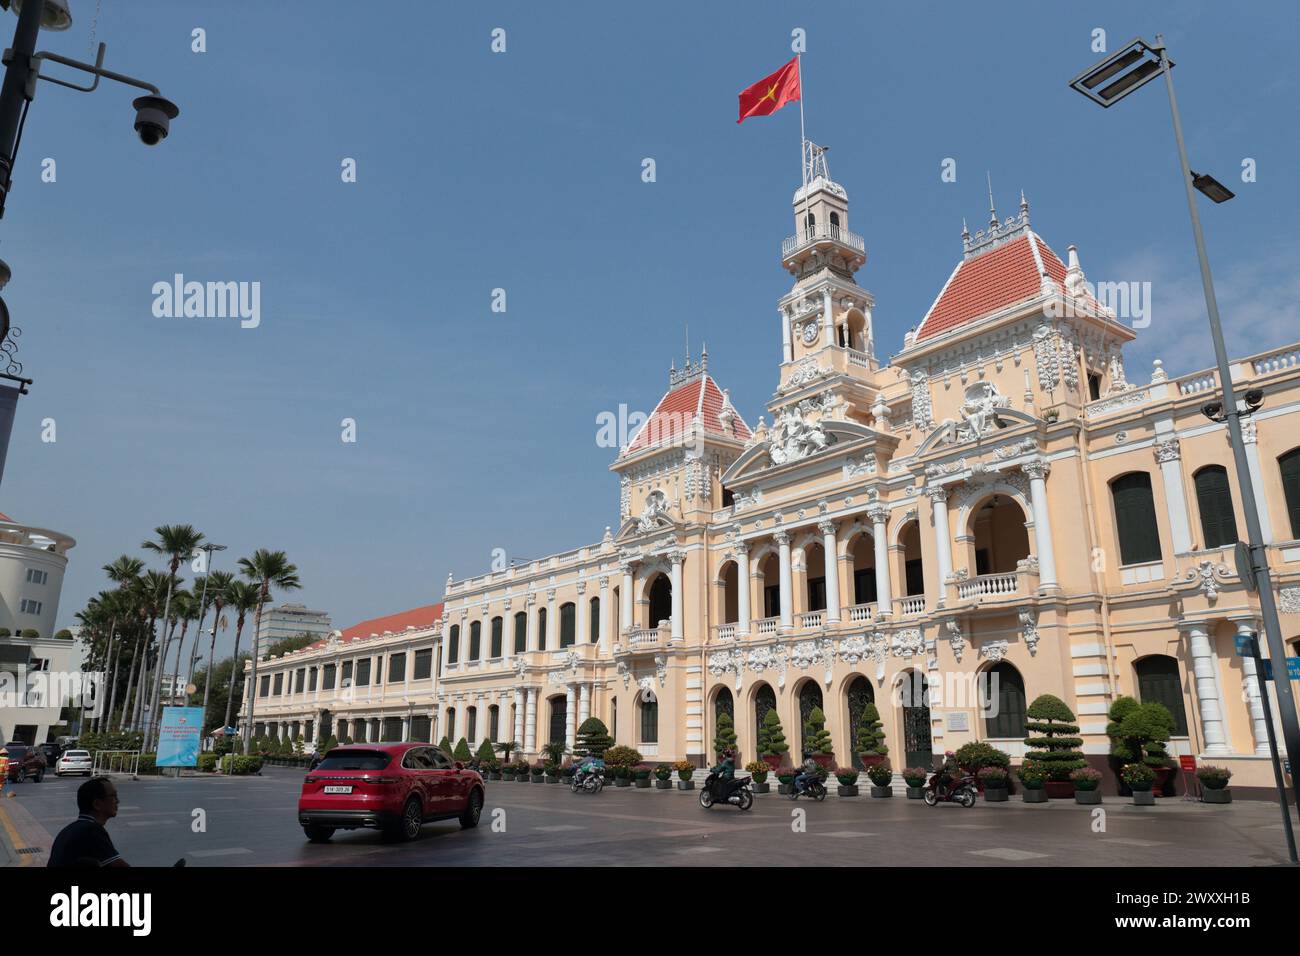 Exterior view of Peoples Committee Building, sunshine and blue sky, Vietnamese National flag flying, Ho Chi Minh City (Saigon),  Vietnam Stock Photo